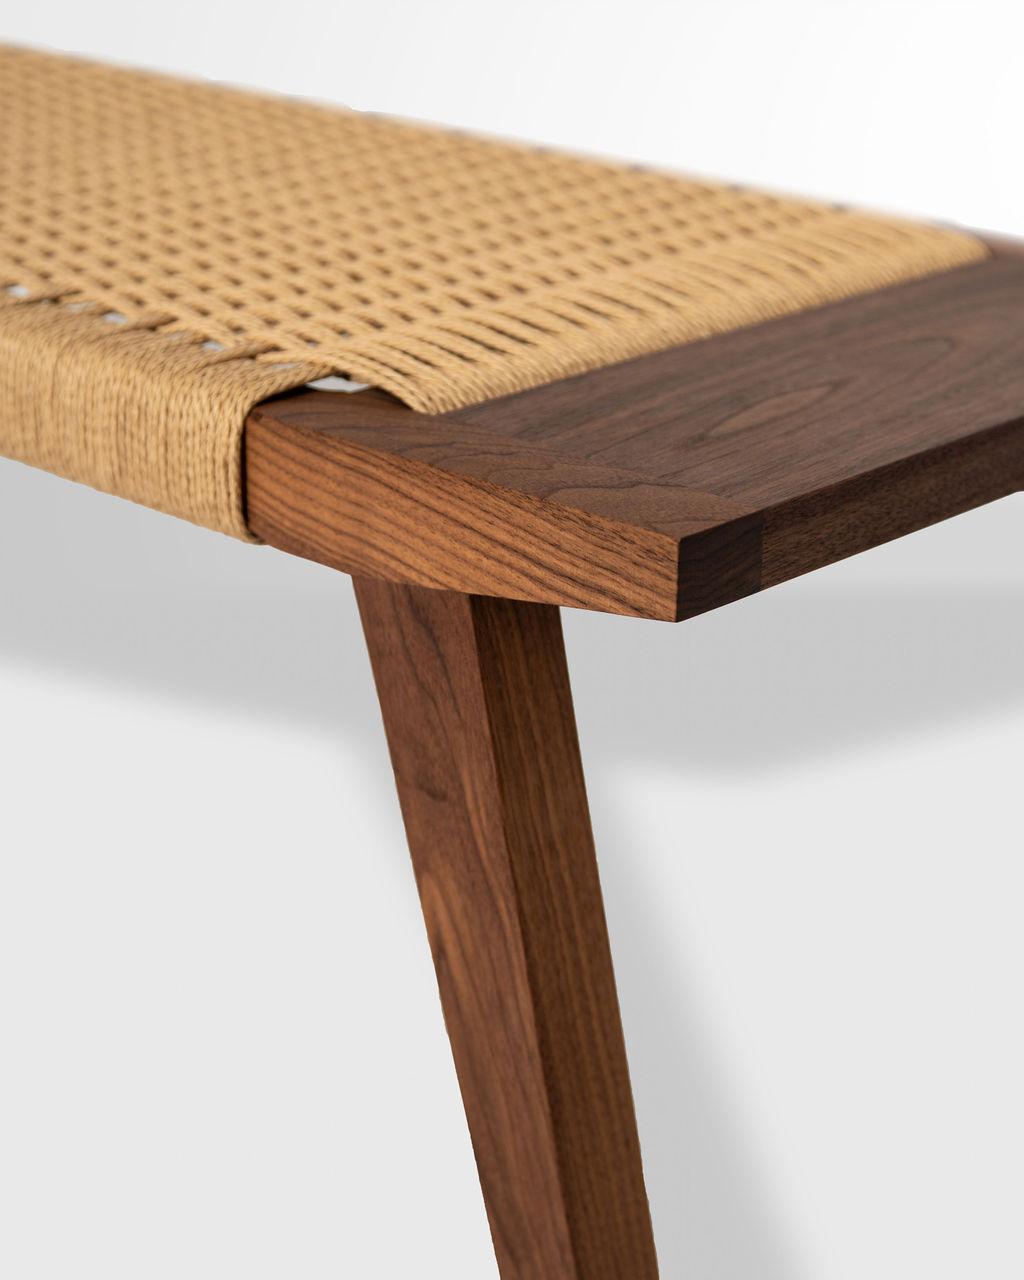 Featuring woven paper cord, walnut, and modest tapers the Canva bench explores a love for material and craftsmanship welded with warm welcome. Constructed with a mortice and Tenon frame and handwoven seat, the Canva bench is artisan-crafted from